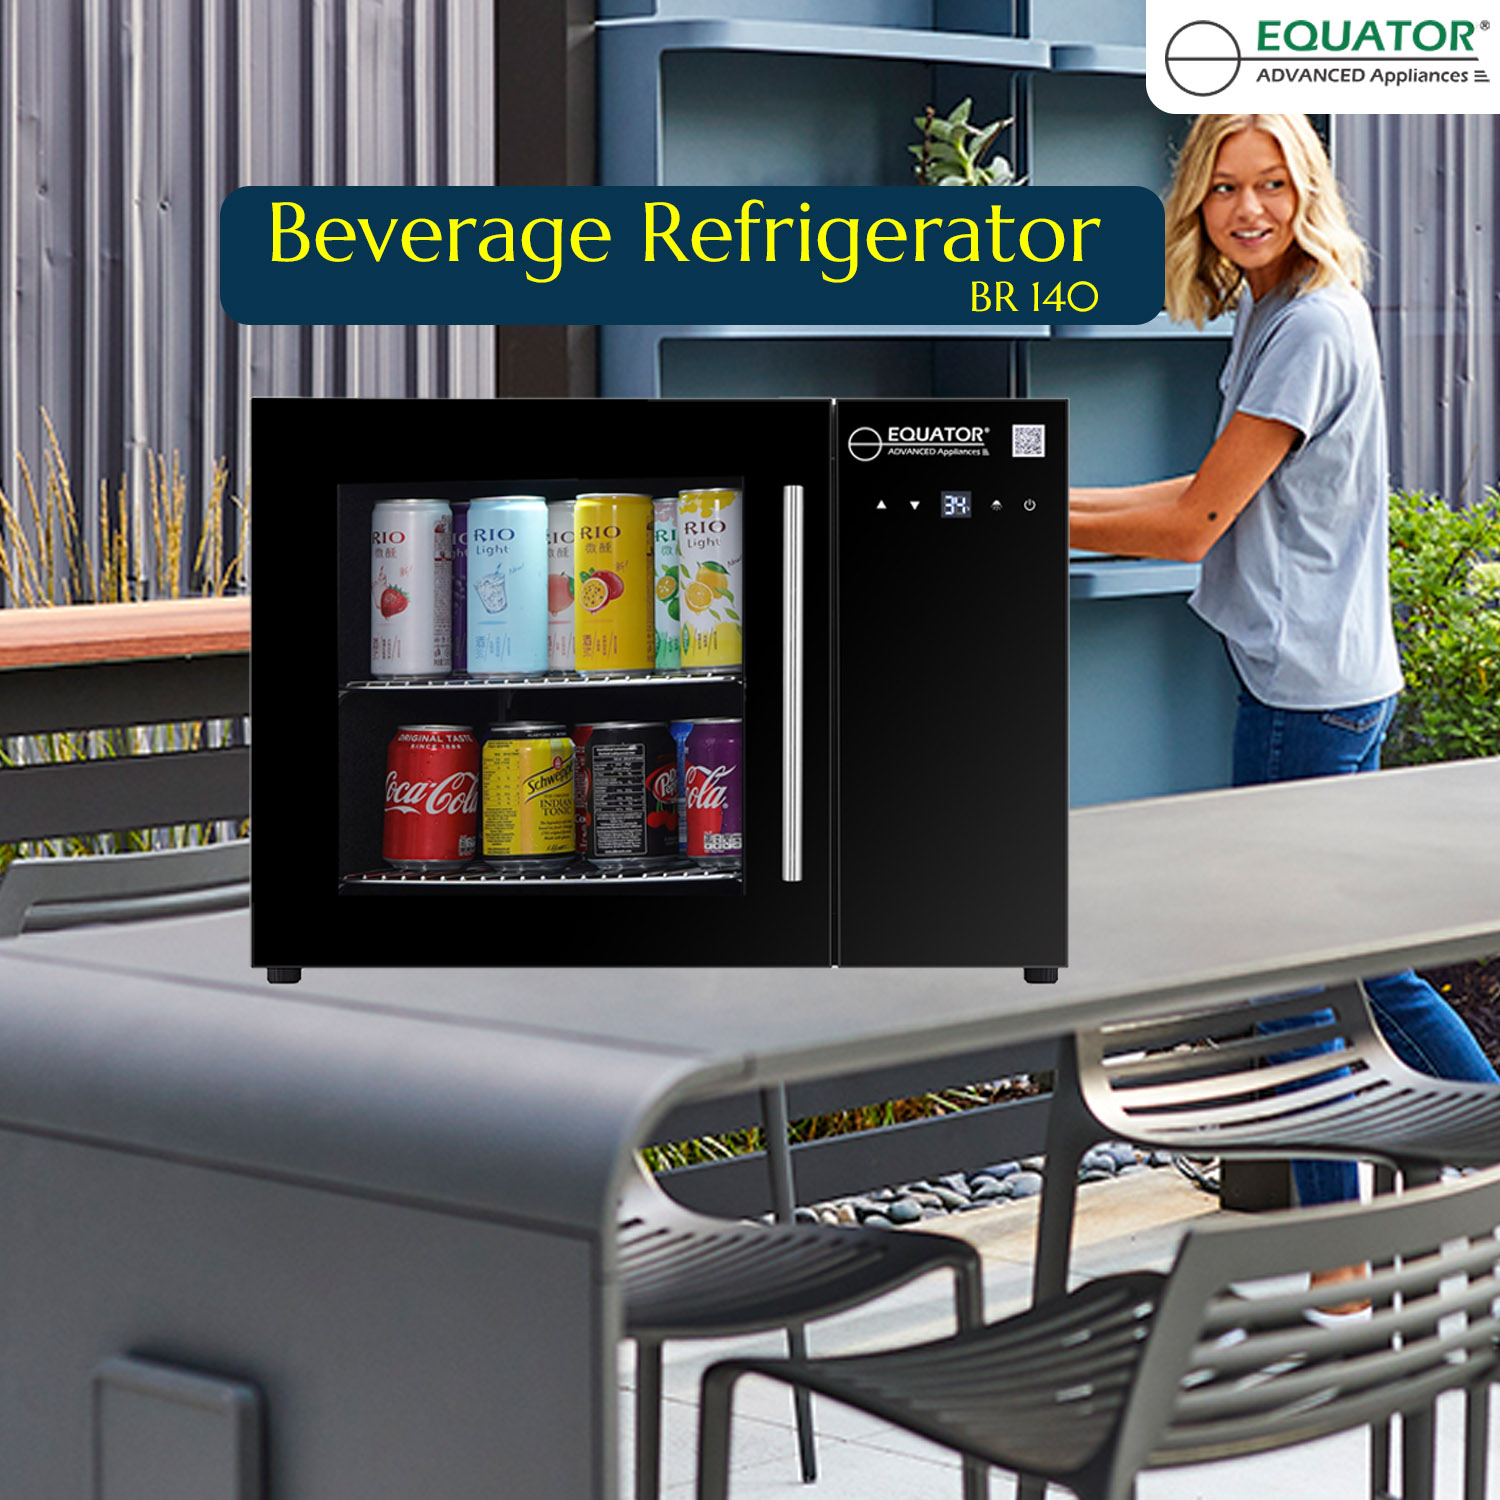 Equator's Beverage Refrigerator Set To Revolutionize How Beverages Are Stored In Compact Spaces